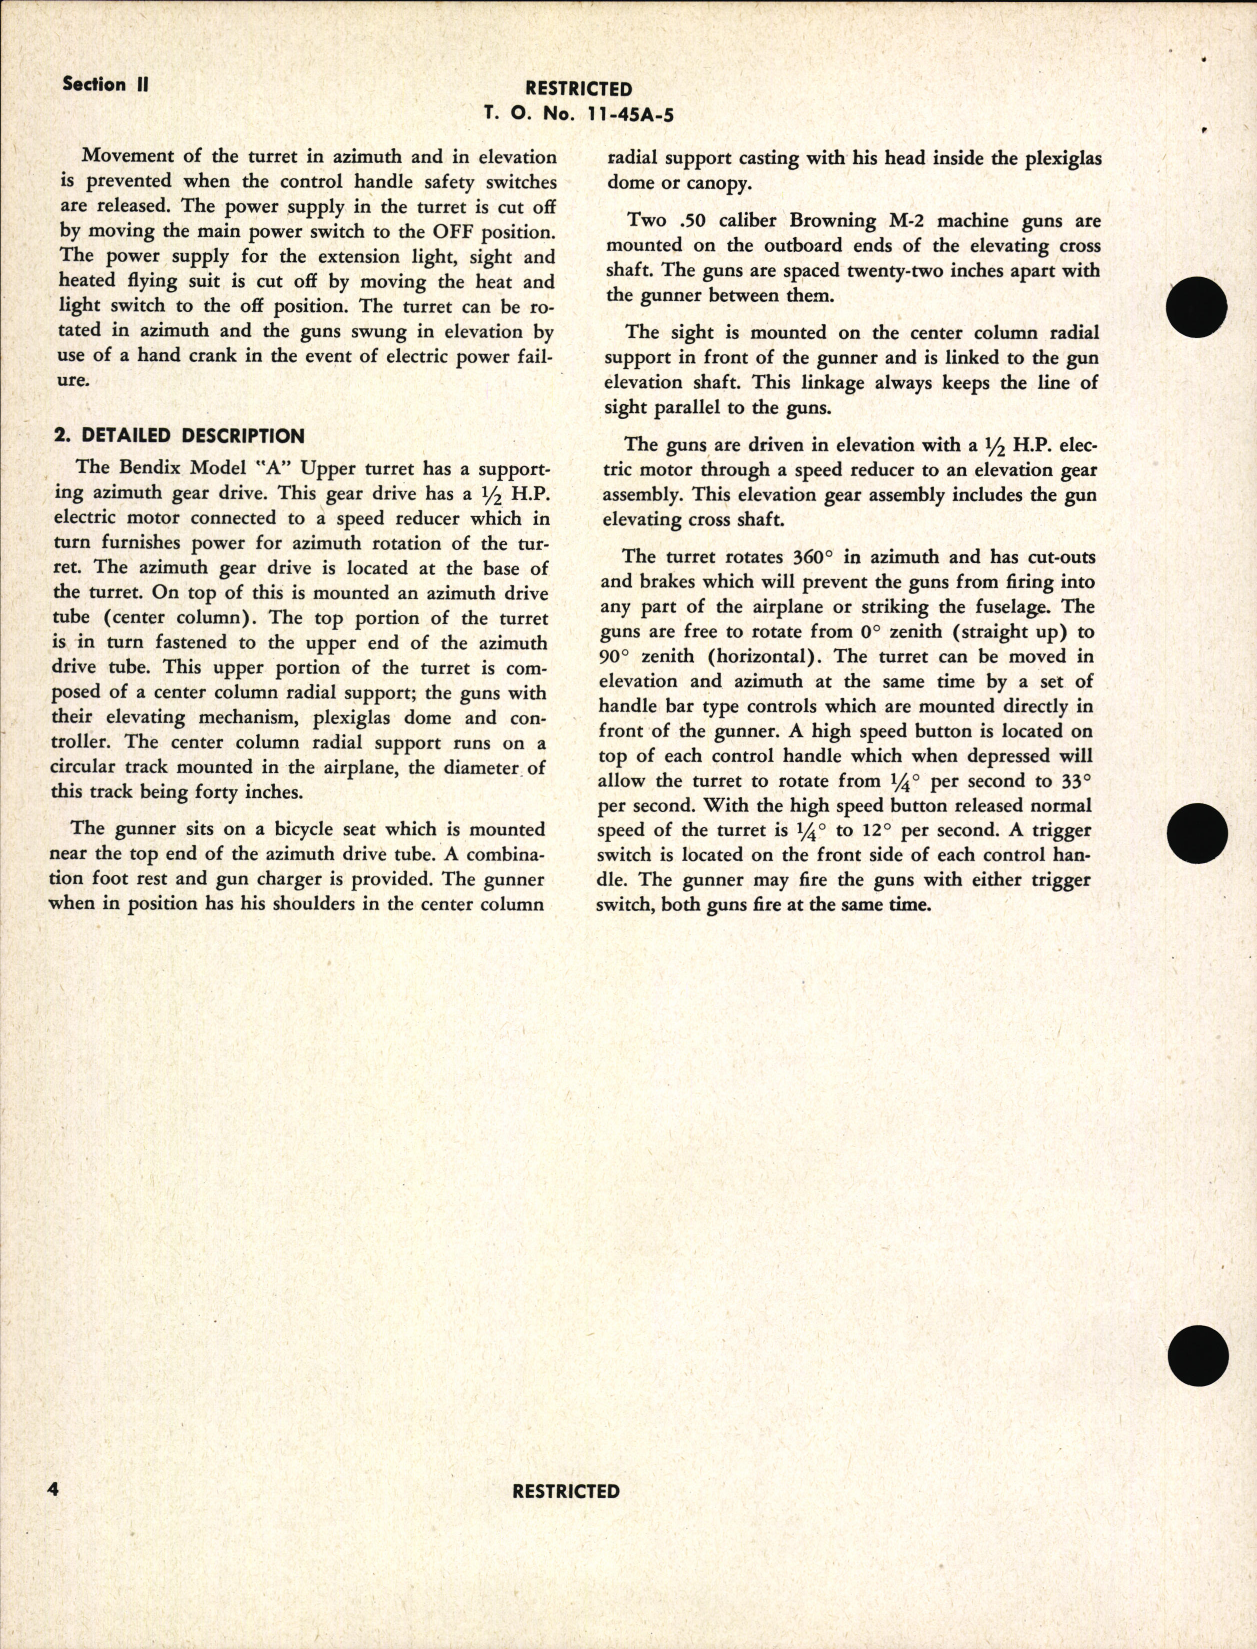 Sample page 8 from AirCorps Library document: Operation and Service Instructions for Model 